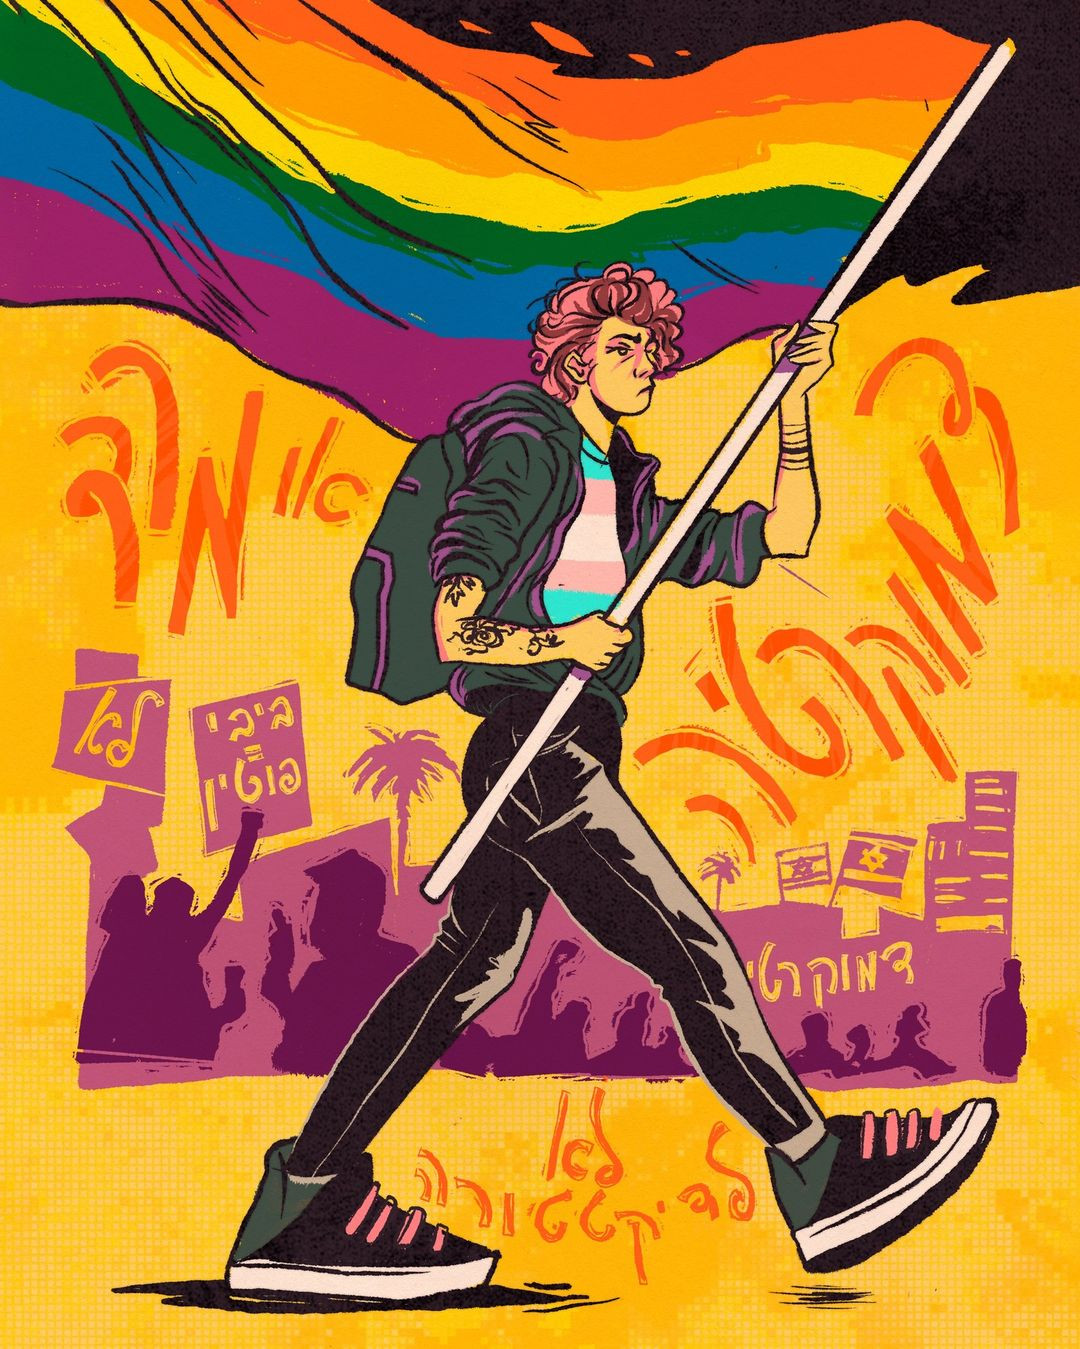 “I‘m queer, and I stand for democracy.I”m non-binary, and I stand for democracy.I“m pansexual, and I stand for democracy.I”m transgender, and I stand for democracy.The inscription on the illustration: “democracy or riot”, “no to dictatorship’”. Tal Yavin